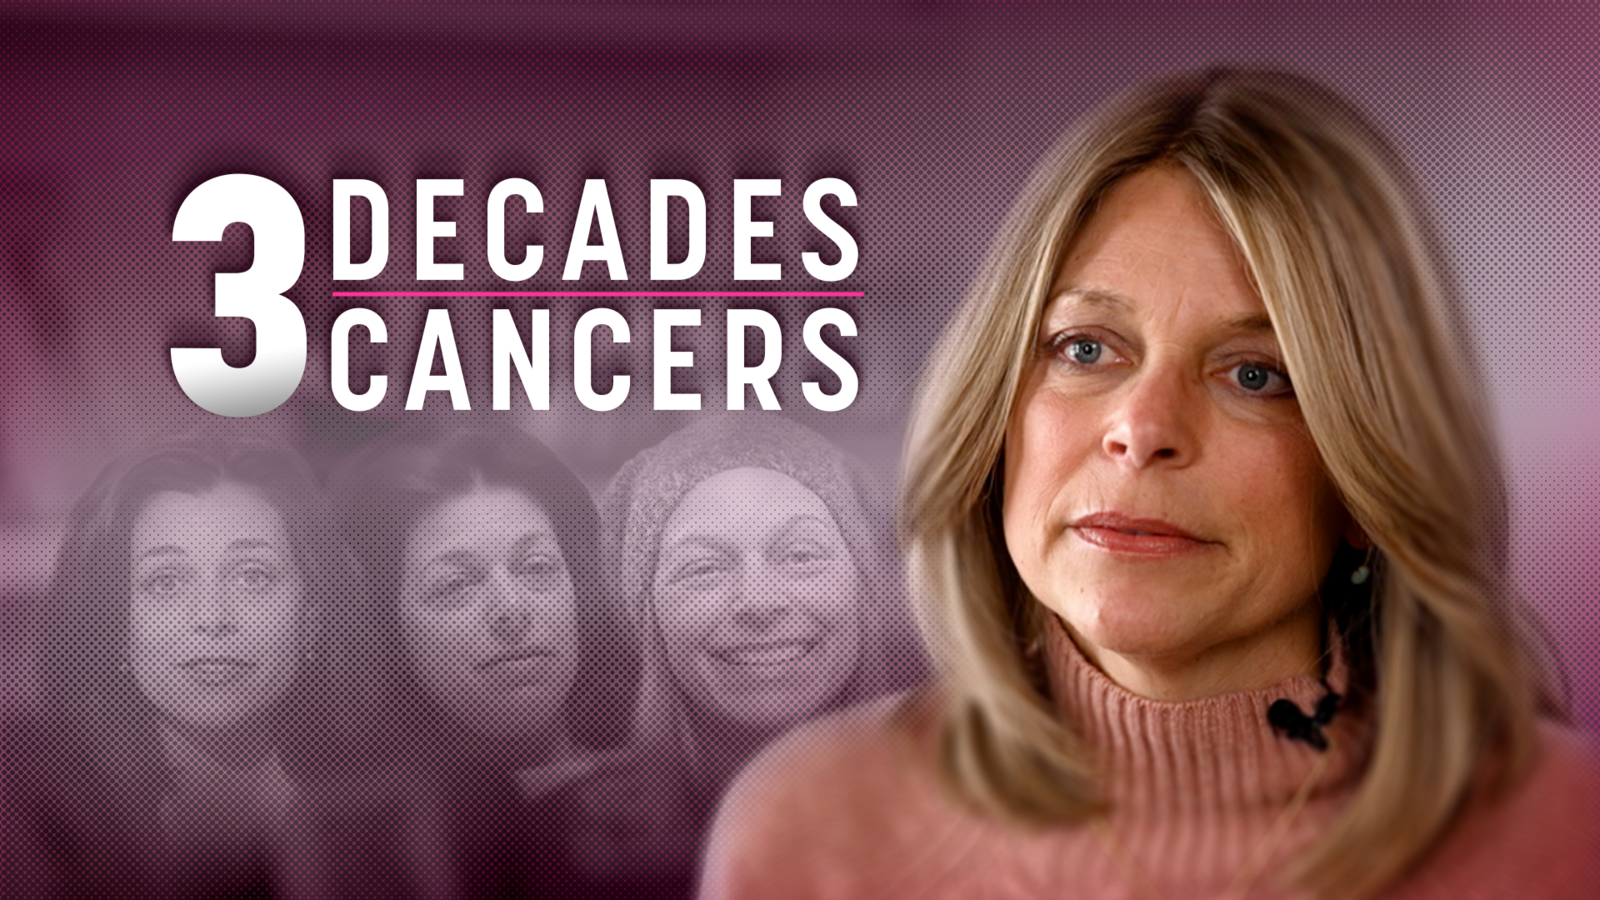 Breast and Ovarian Cancer: Stacey Sager’s story of perseverance, sacrifice and survival after 3 diagnoses [Video]